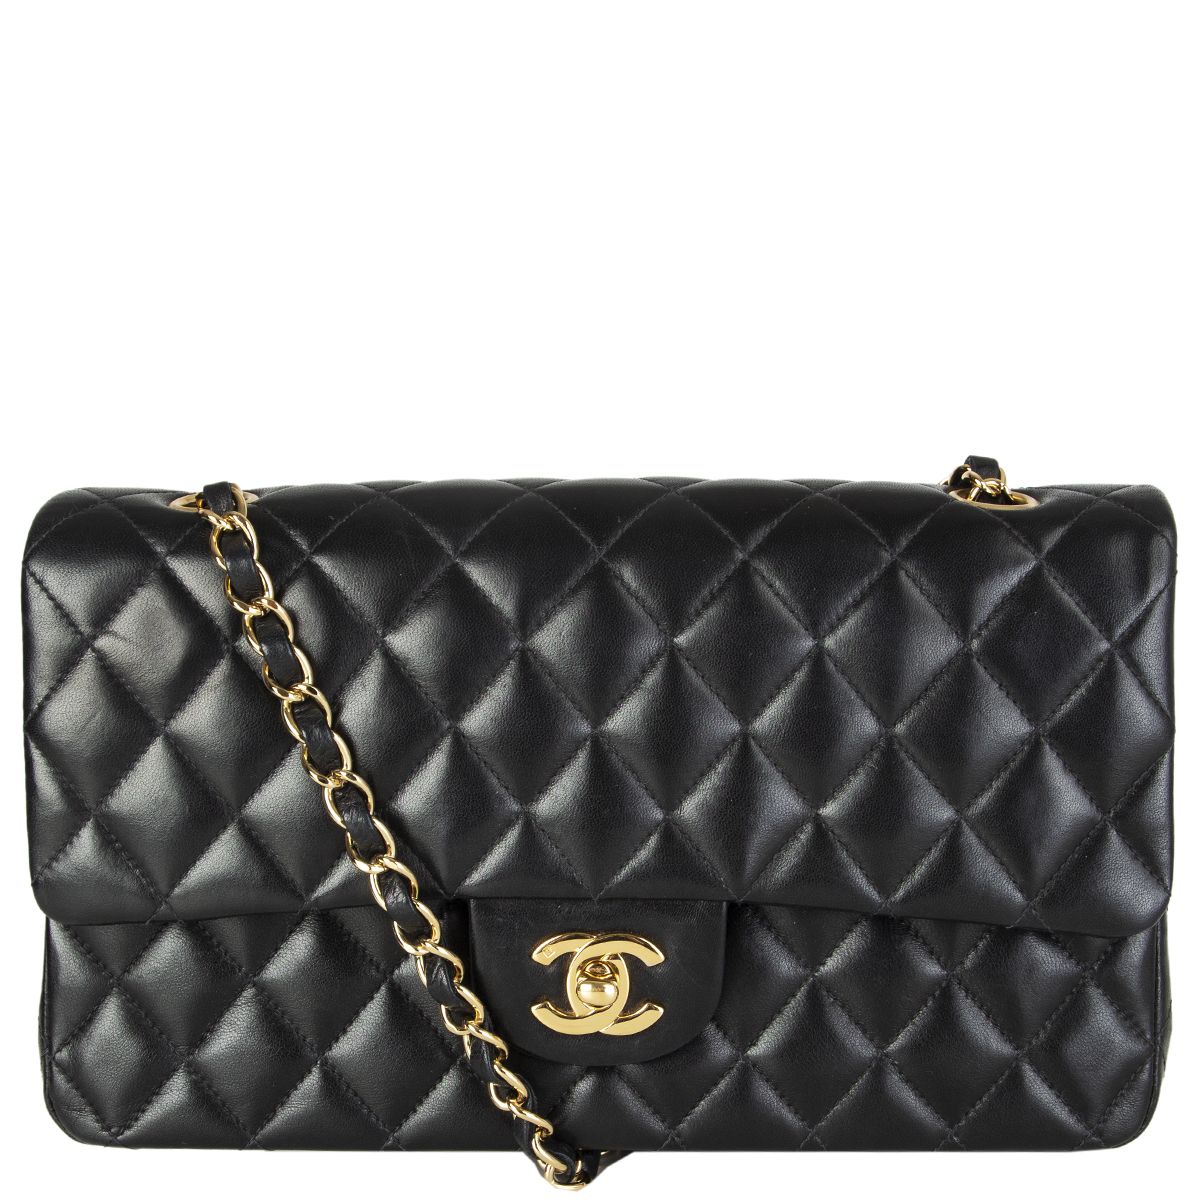 Chanel Cream Quilted Tweed Fringe Fold Over Clutch Chanel